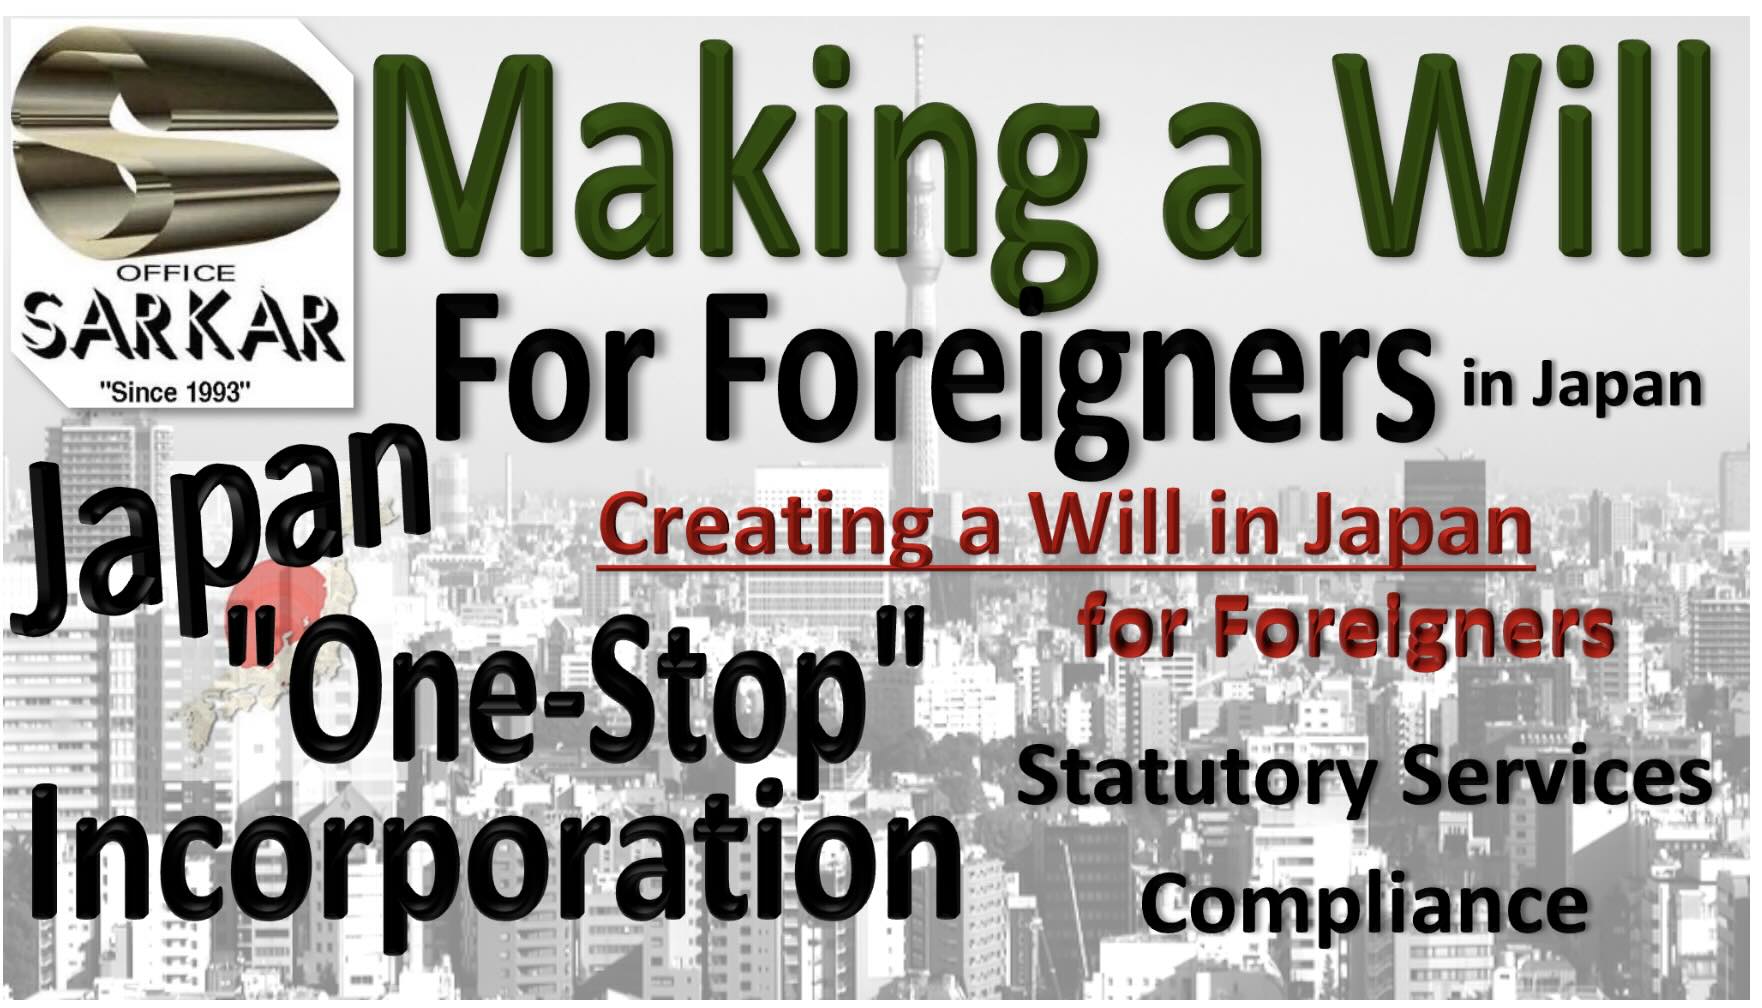 Creating a Will for foreigners in Japan